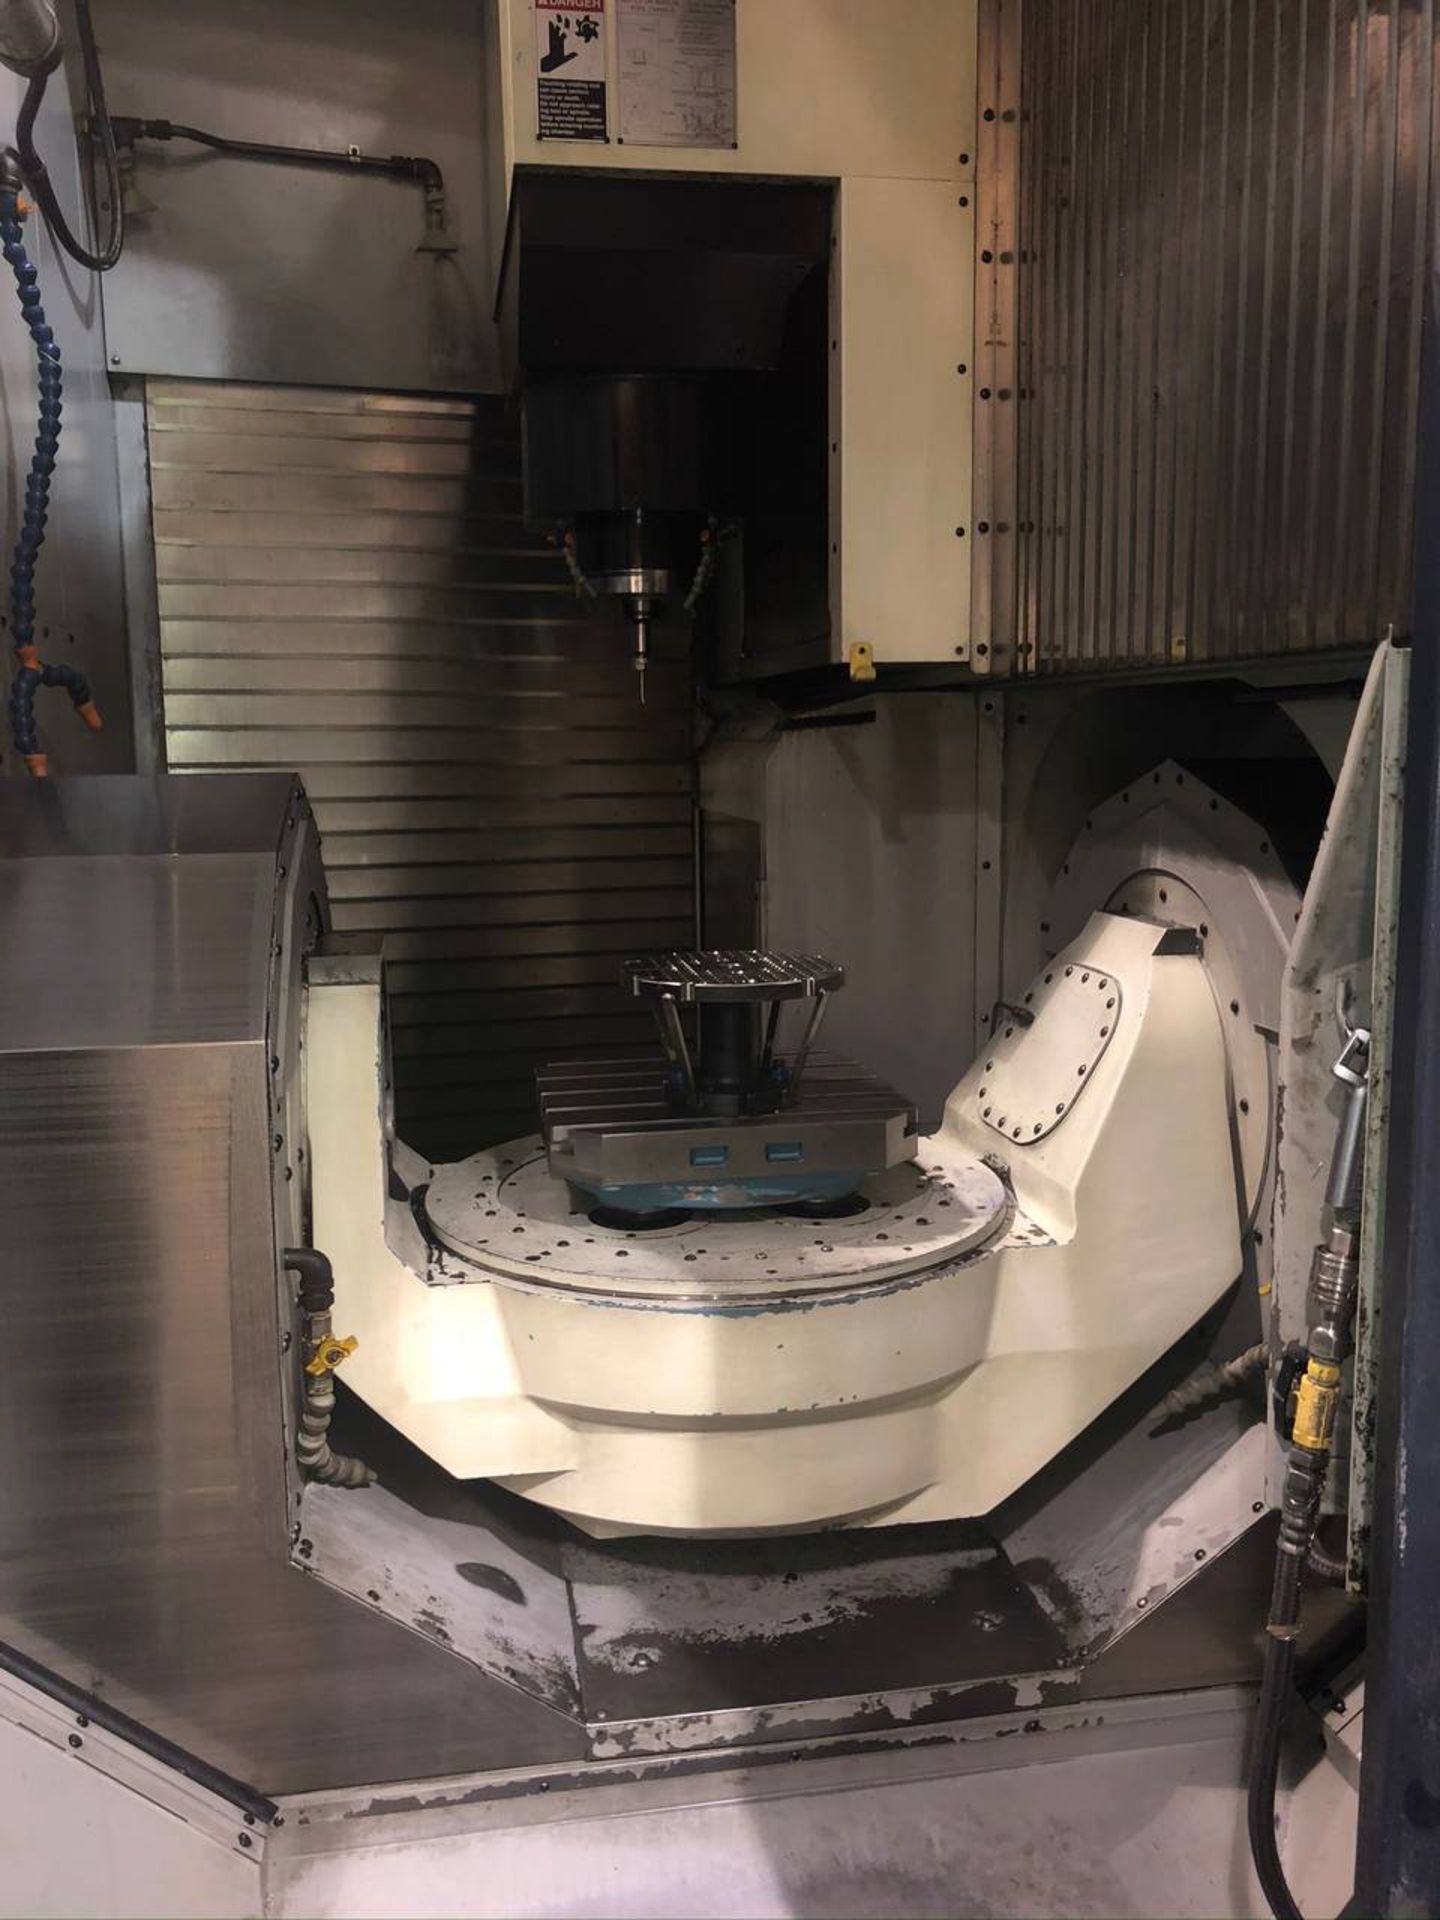 2012 Makino D500 5 Axis CNC Vertical Maching Center, - Image 5 of 7